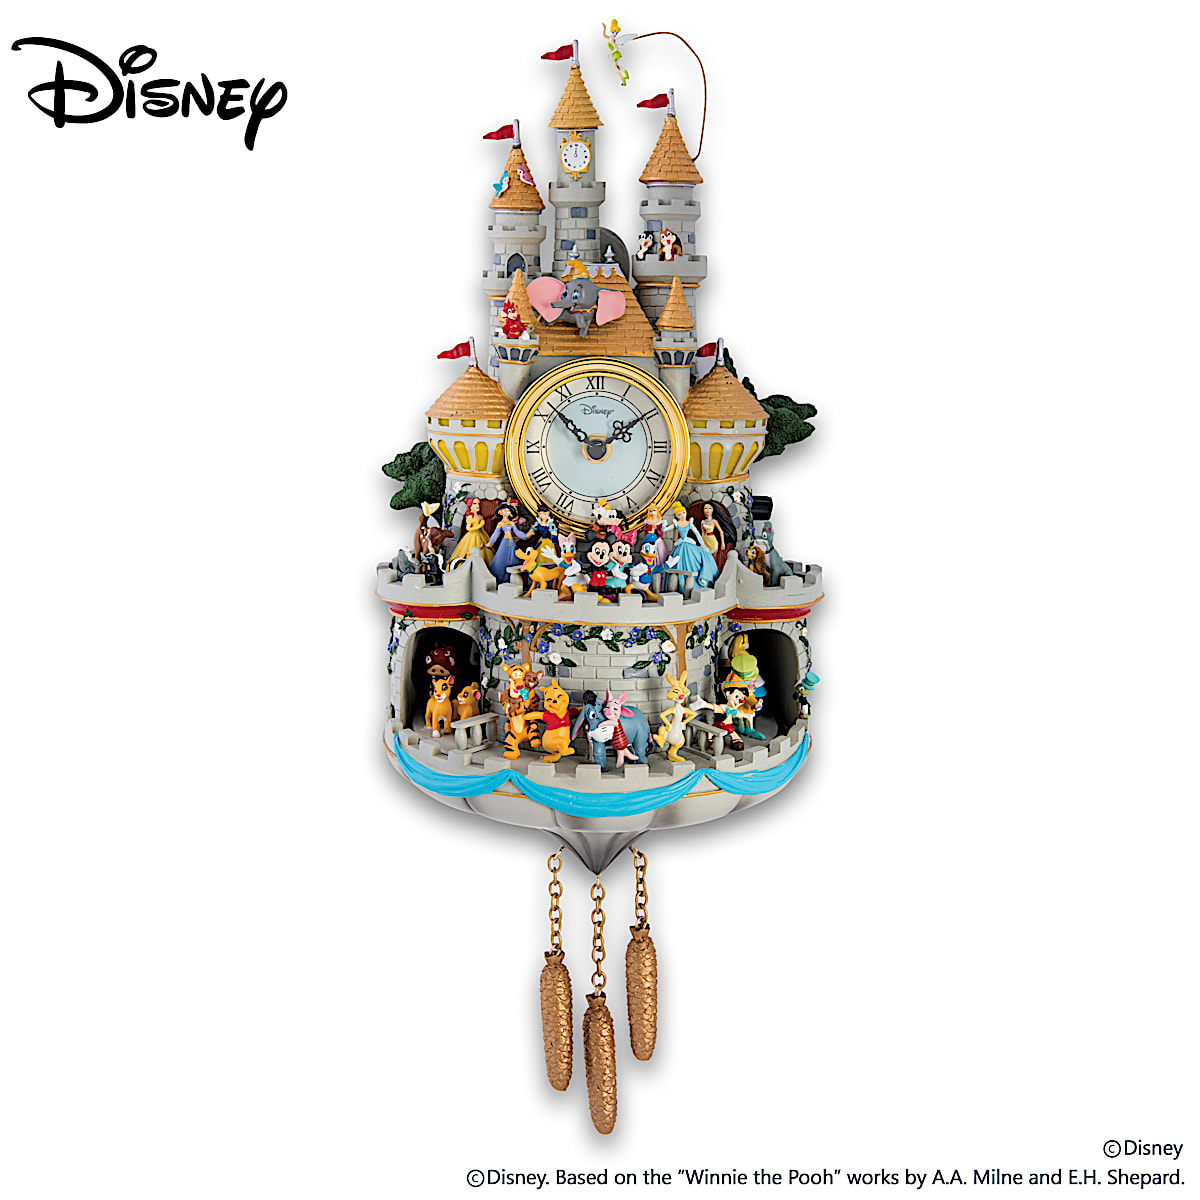 Disney "Timeless Magic" Wall Clock With 43 Friends